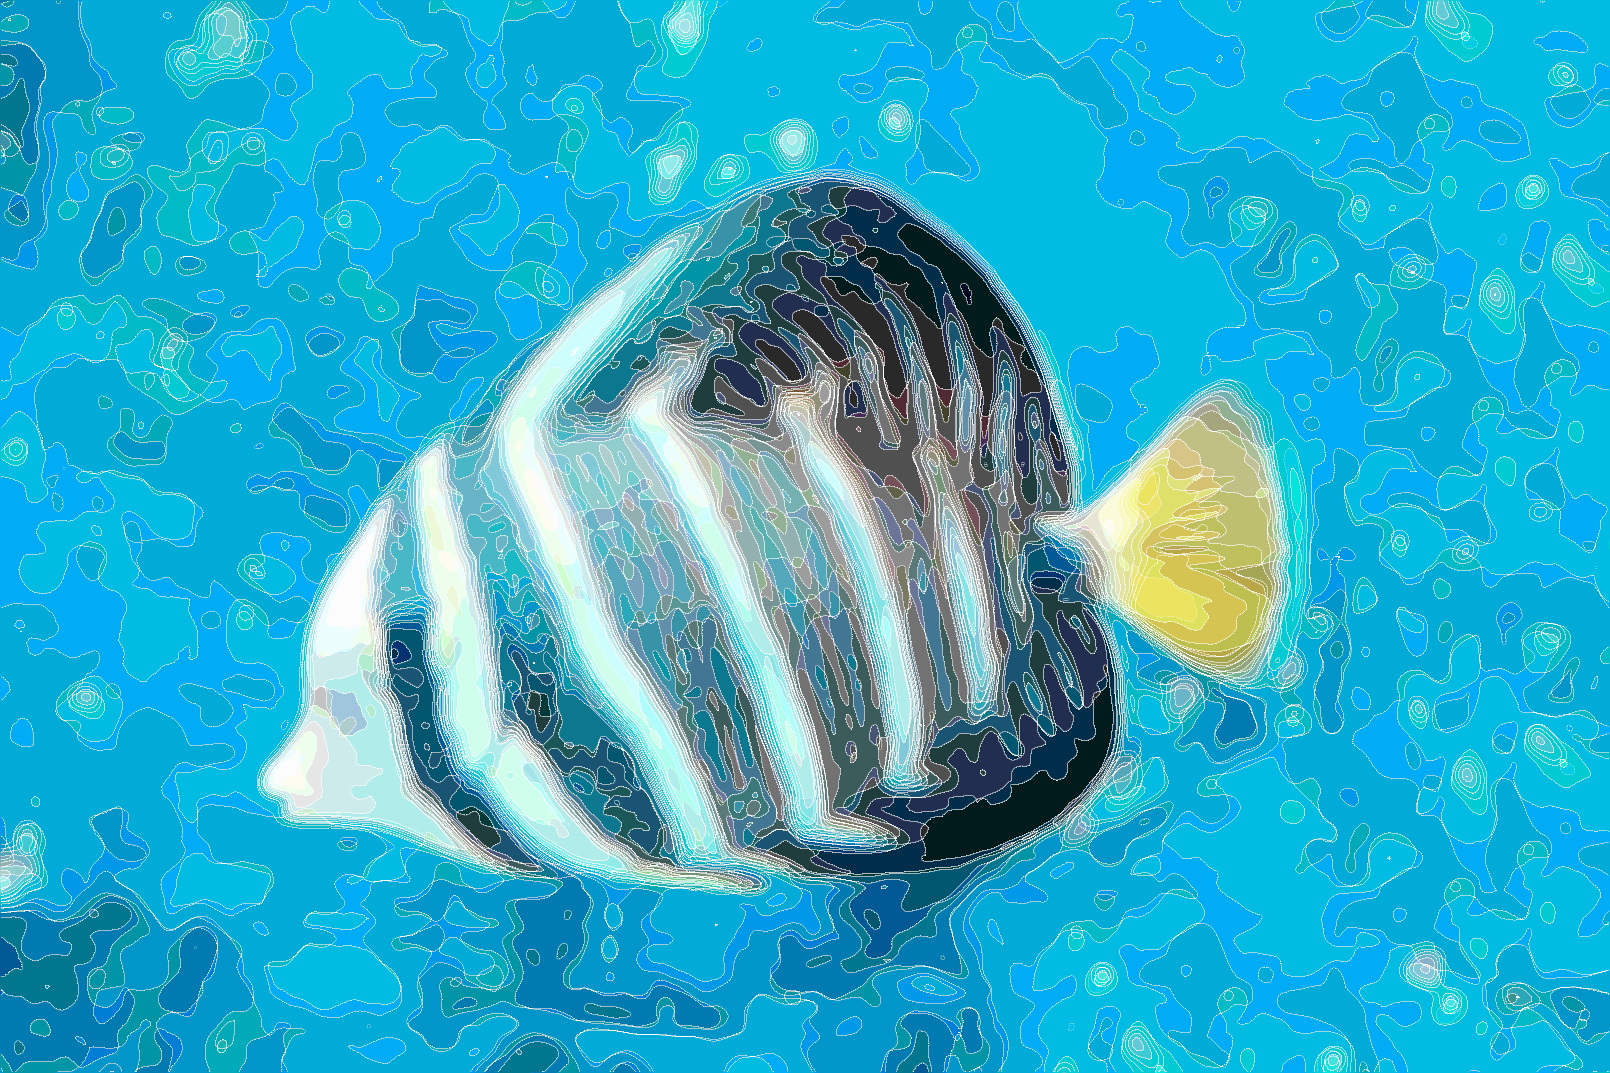 Illustration_of_sailfin_tang_divided_by_lines